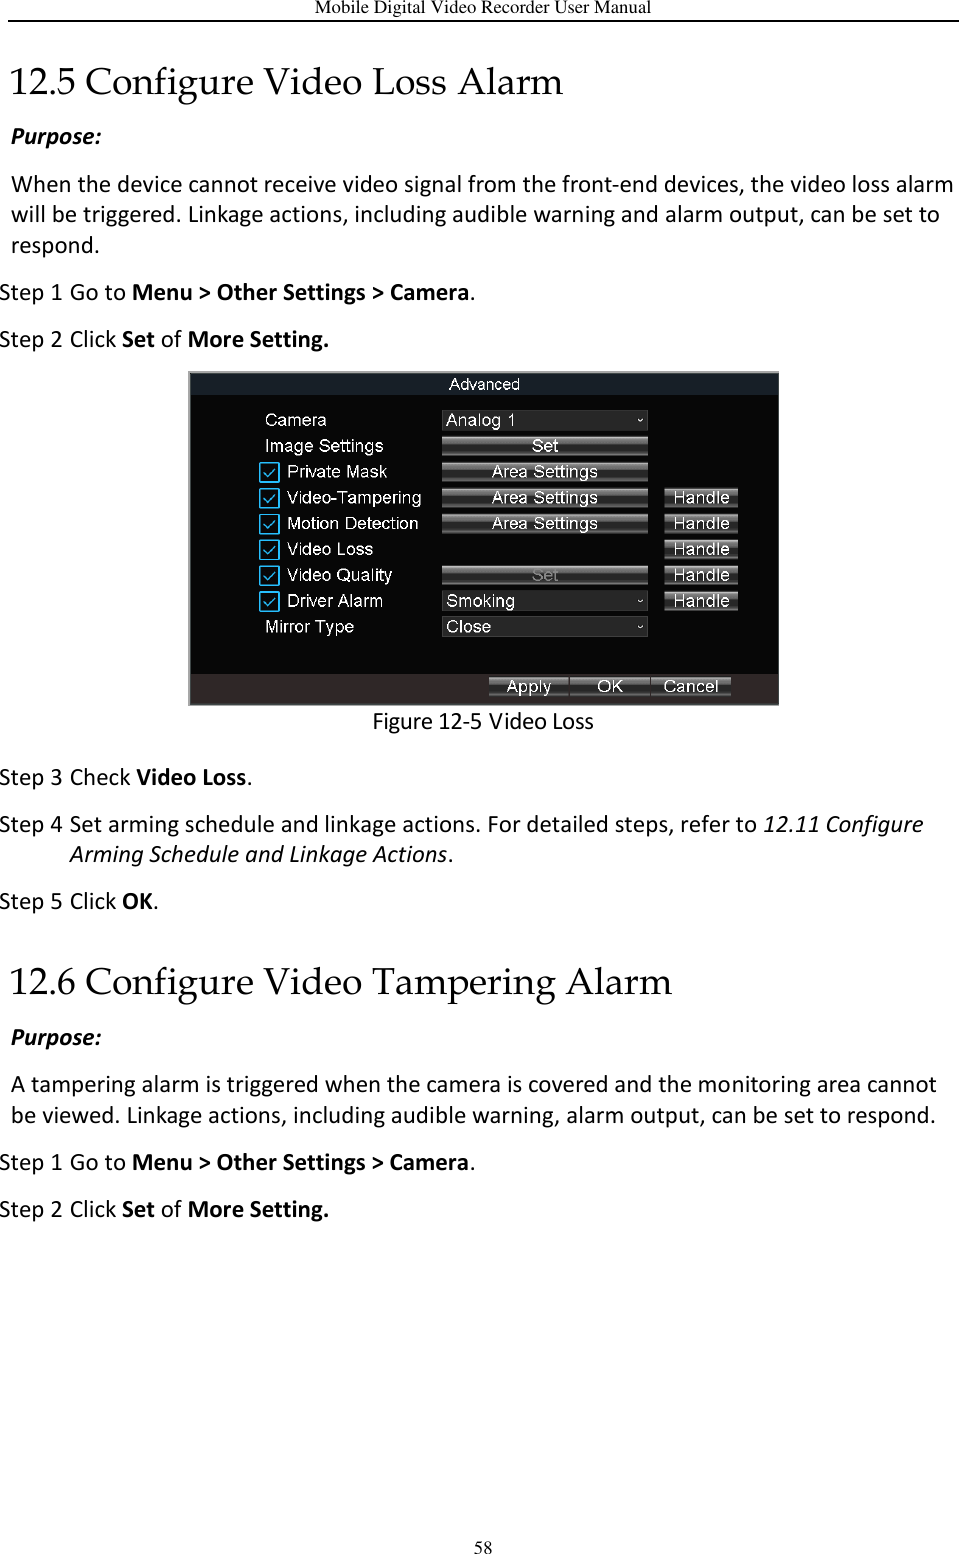 Mobile Digital Video Recorder User Manual 58 12.5 Configure Video Loss Alarm Purpose:   When the device cannot receive video signal from the front-end devices, the video loss alarm will be triggered. Linkage actions, including audible warning and alarm output, can be set to respond. Step 1 Go to Menu &gt; Other Settings &gt; Camera. Step 2 Click Set of More Setting.  Figure 12-5 Video Loss Step 3 Check Video Loss. Step 4 Set arming schedule and linkage actions. For detailed steps, refer to 12.11 Configure Arming Schedule and Linkage Actions. Step 5 Click OK. 12.6 Configure Video Tampering Alarm Purpose:   A tampering alarm is triggered when the camera is covered and the monitoring area cannot be viewed. Linkage actions, including audible warning, alarm output, can be set to respond. Step 1 Go to Menu &gt; Other Settings &gt; Camera. Step 2 Click Set of More Setting. 